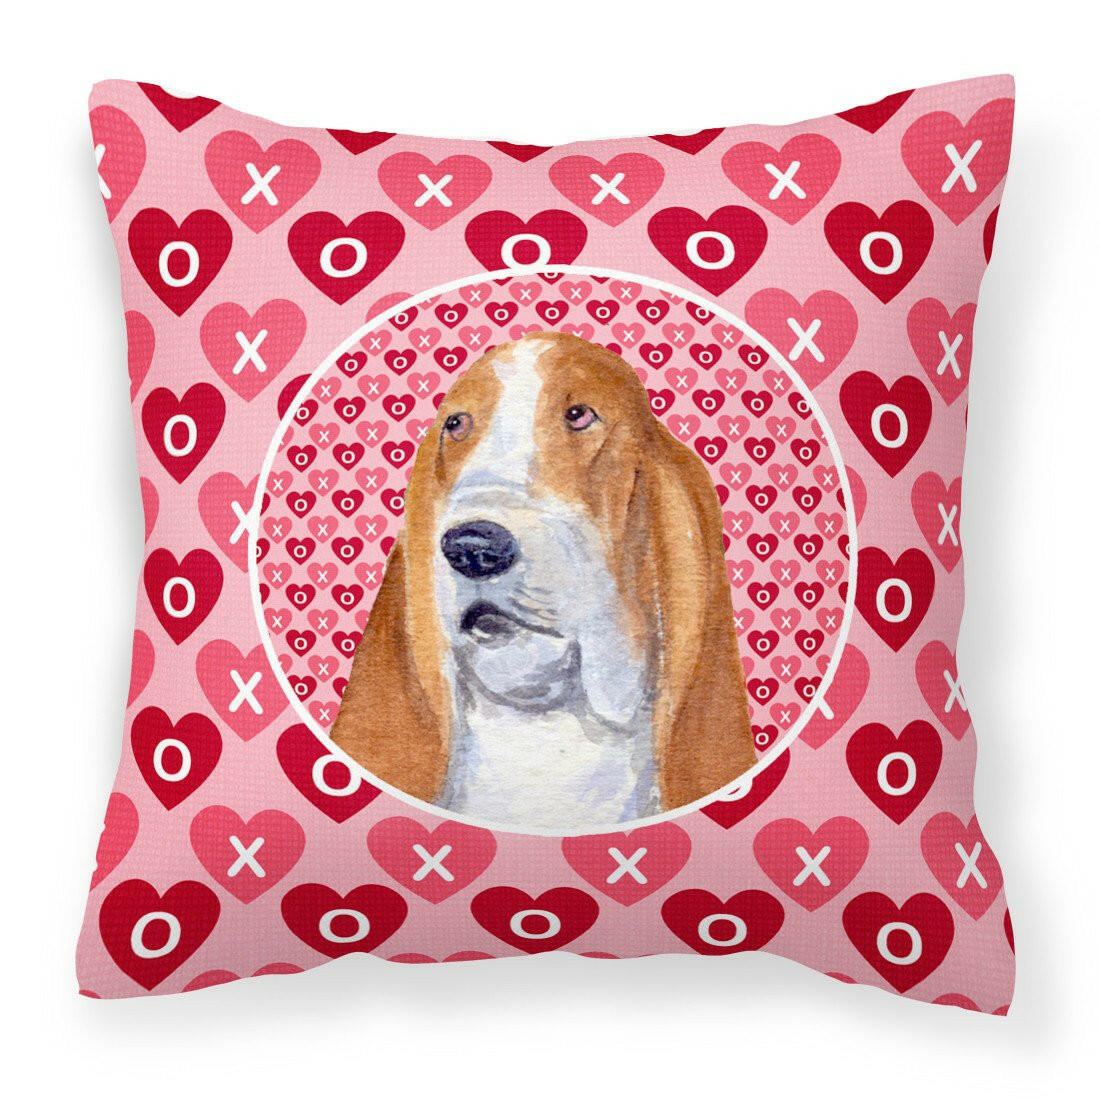 Basset Hound Hearts Love and Valentine's Day Portrait Fabric Decorative Pillow SS4528PW1414 by Caroline's Treasures